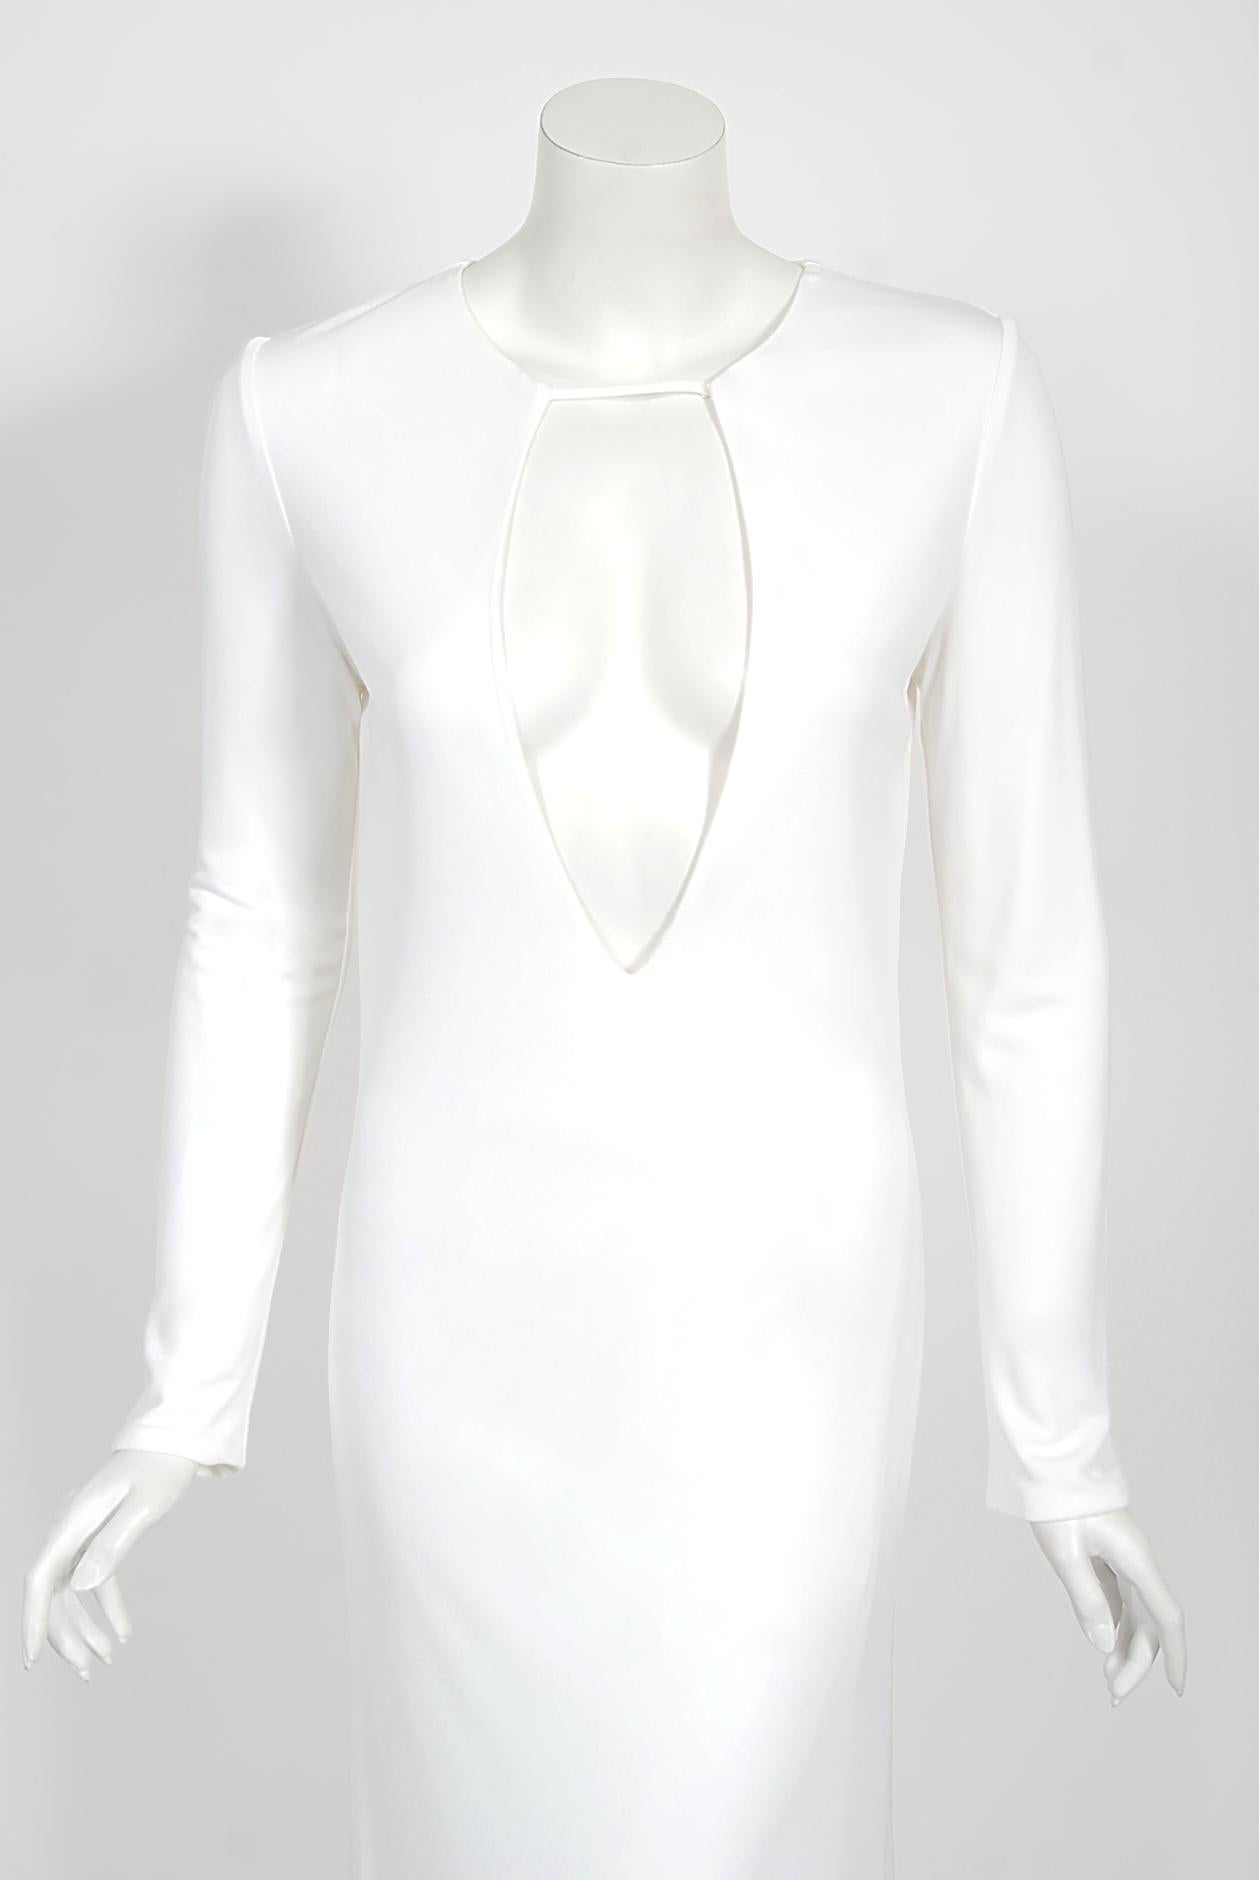 Women's Vintage 1996 Gucci by Tom Ford Runway White Stretch Jersey Cut-Out Plunge Gown